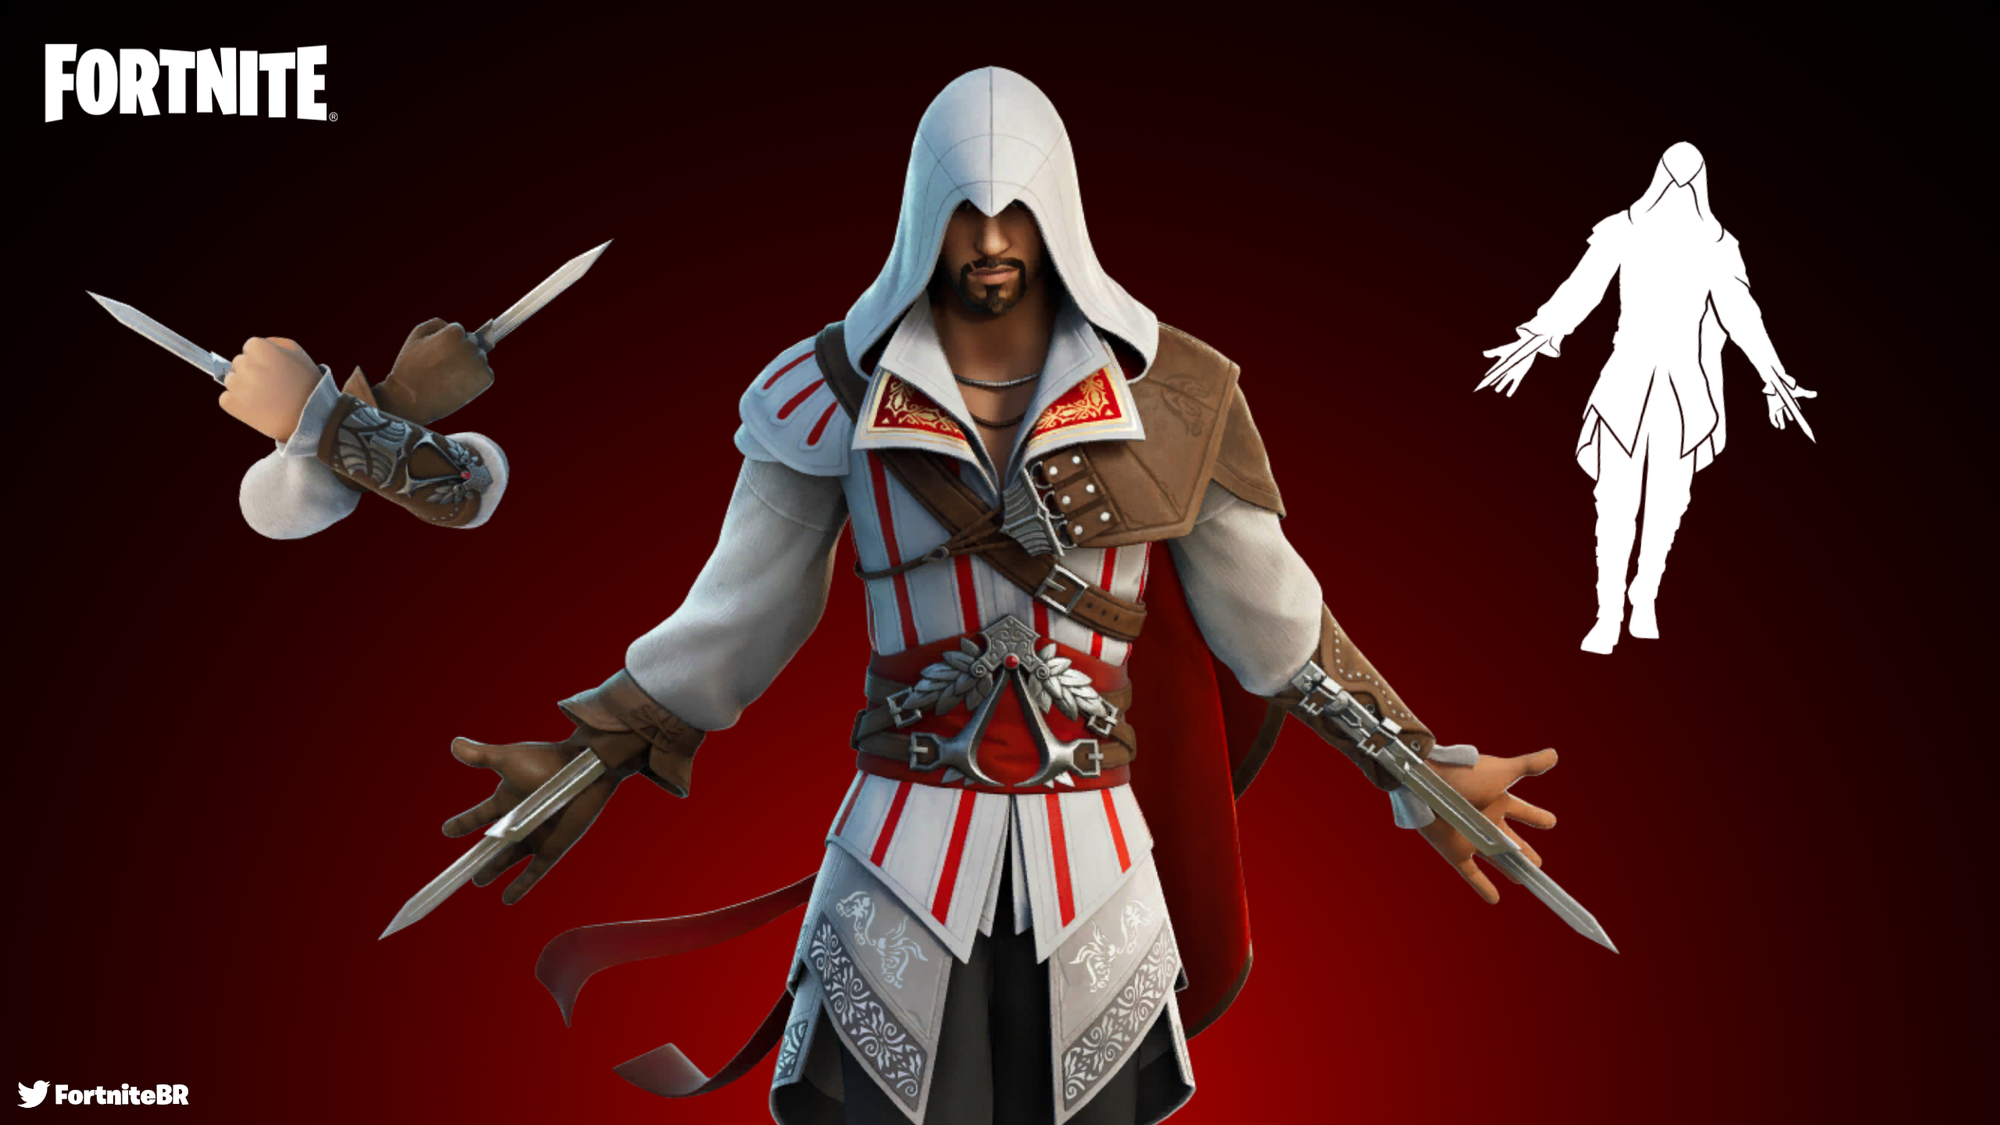 Fortnite x Assassin's Creed: How to get the Ezio Auditore Outfit | Fortnite  News